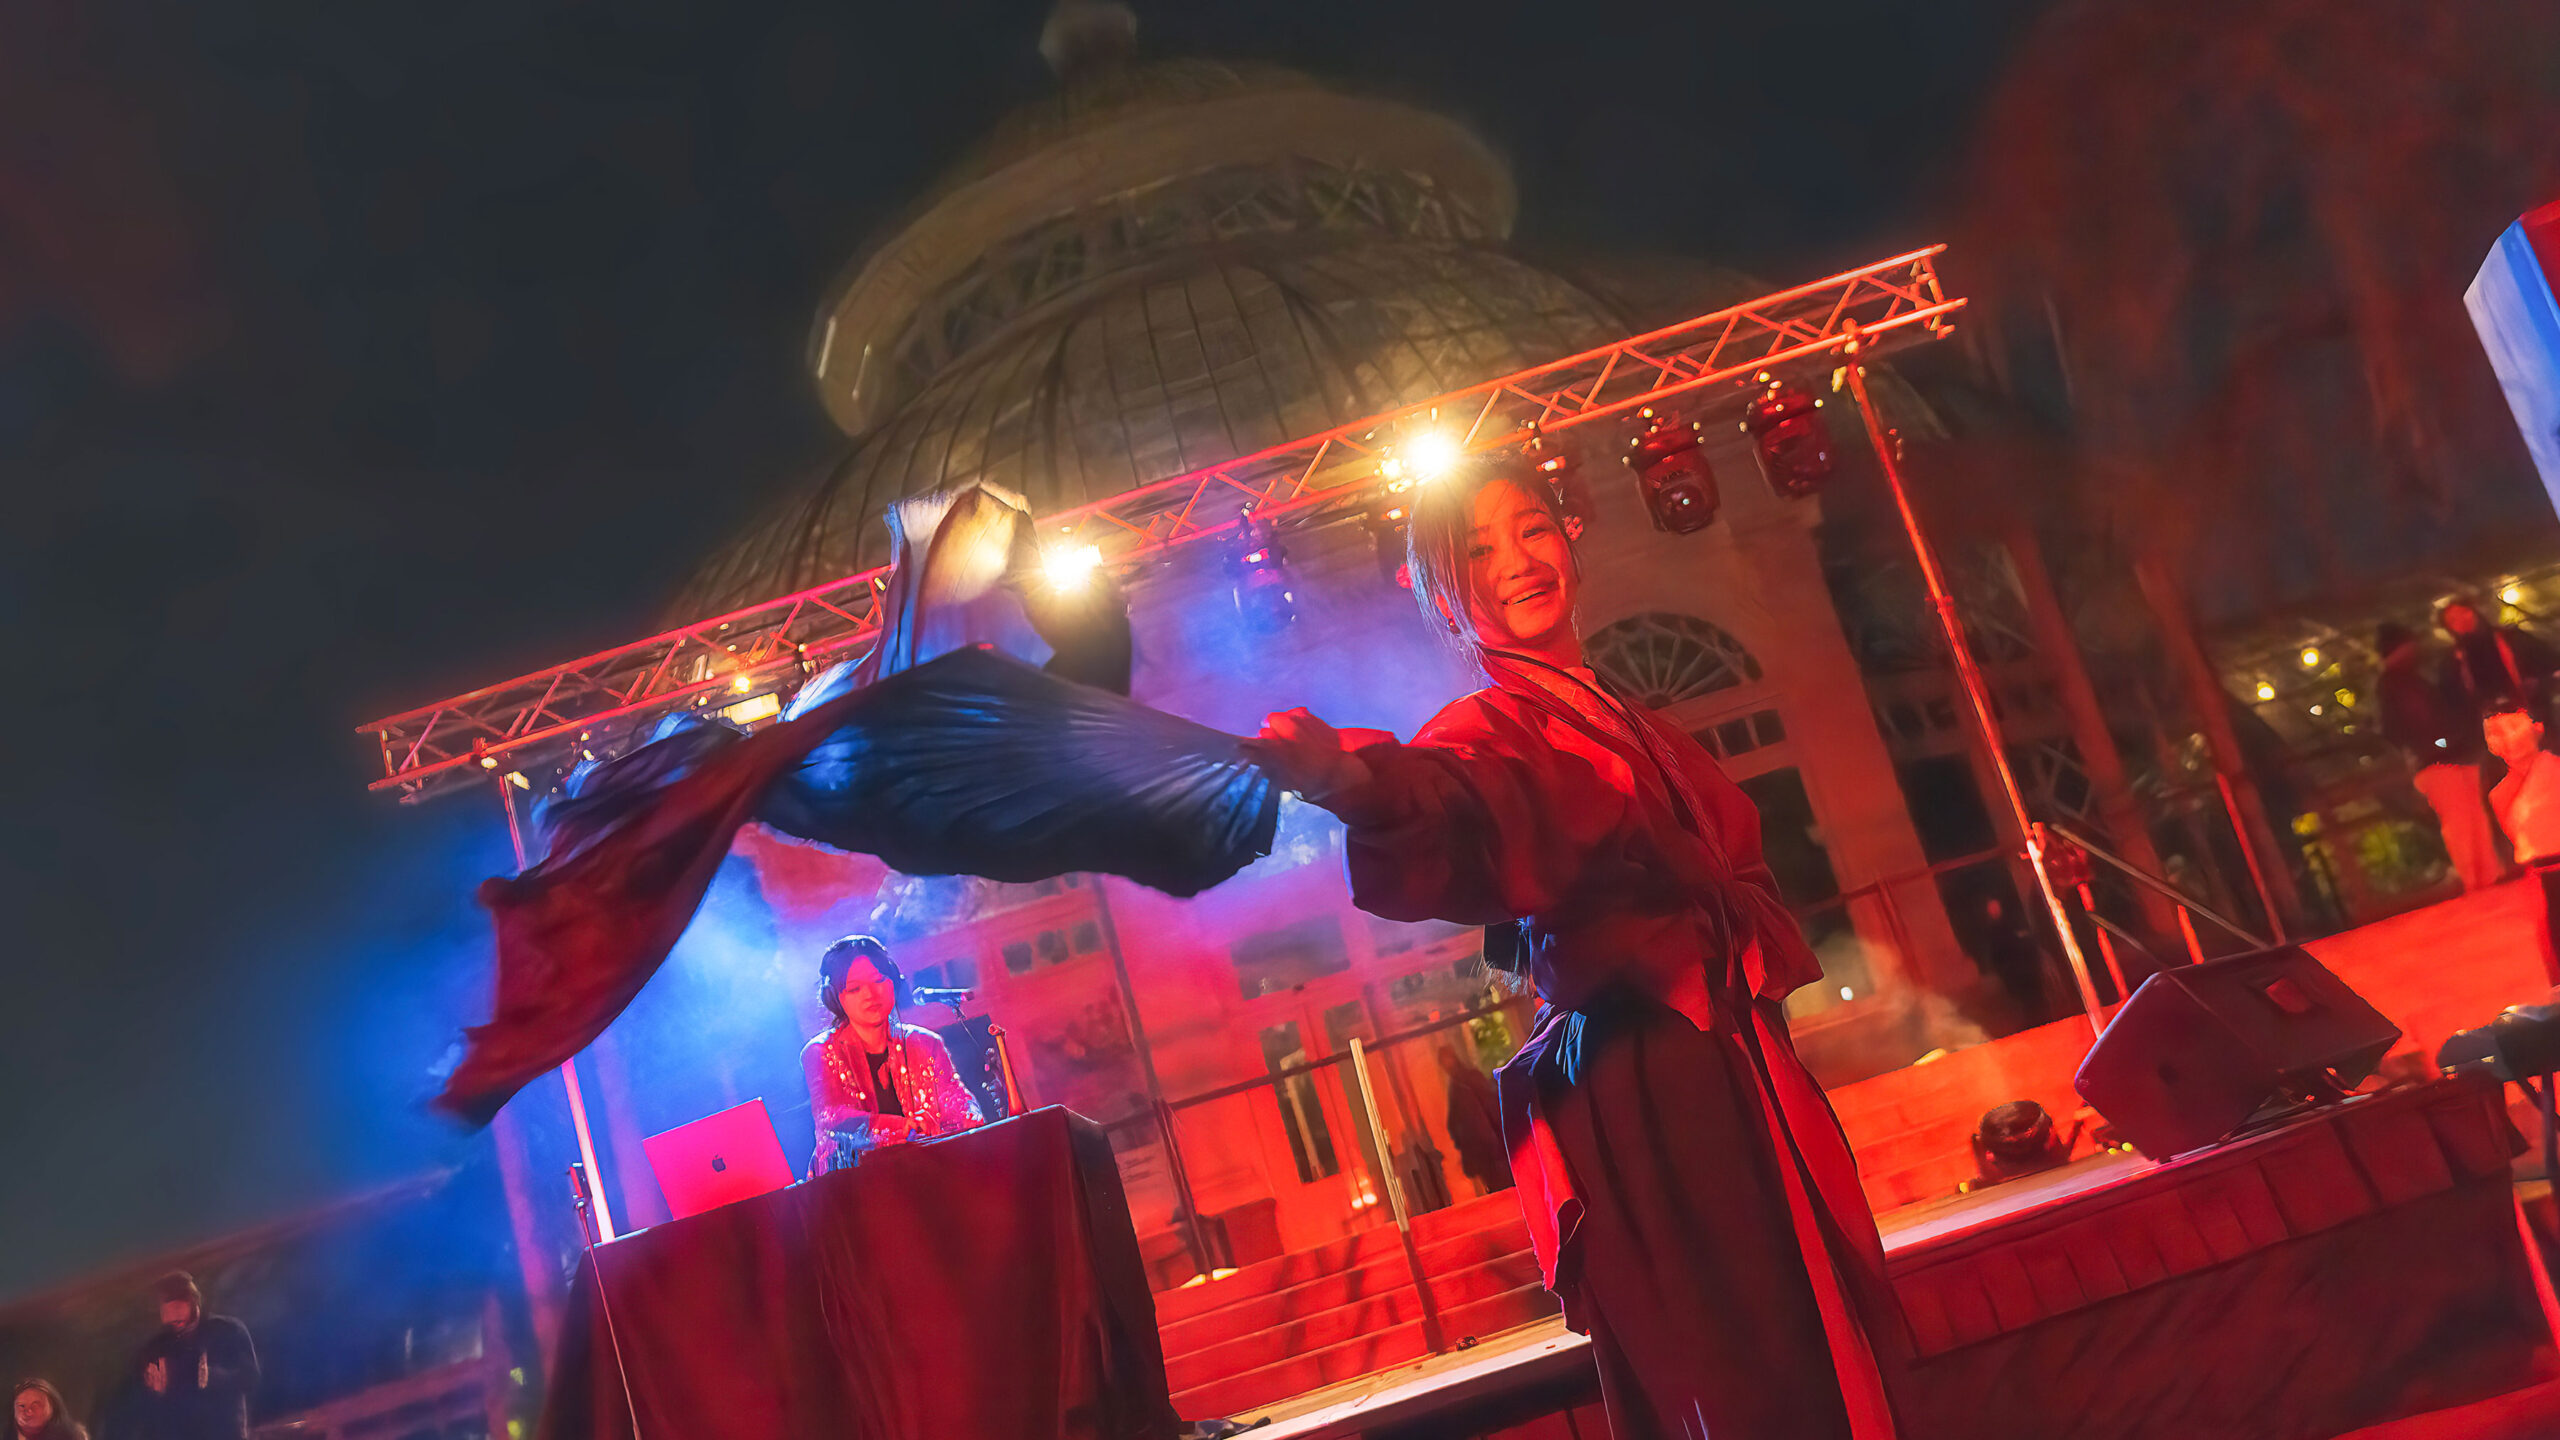 a DJ on stage with a performer twirling a fabric flag under red stage lights